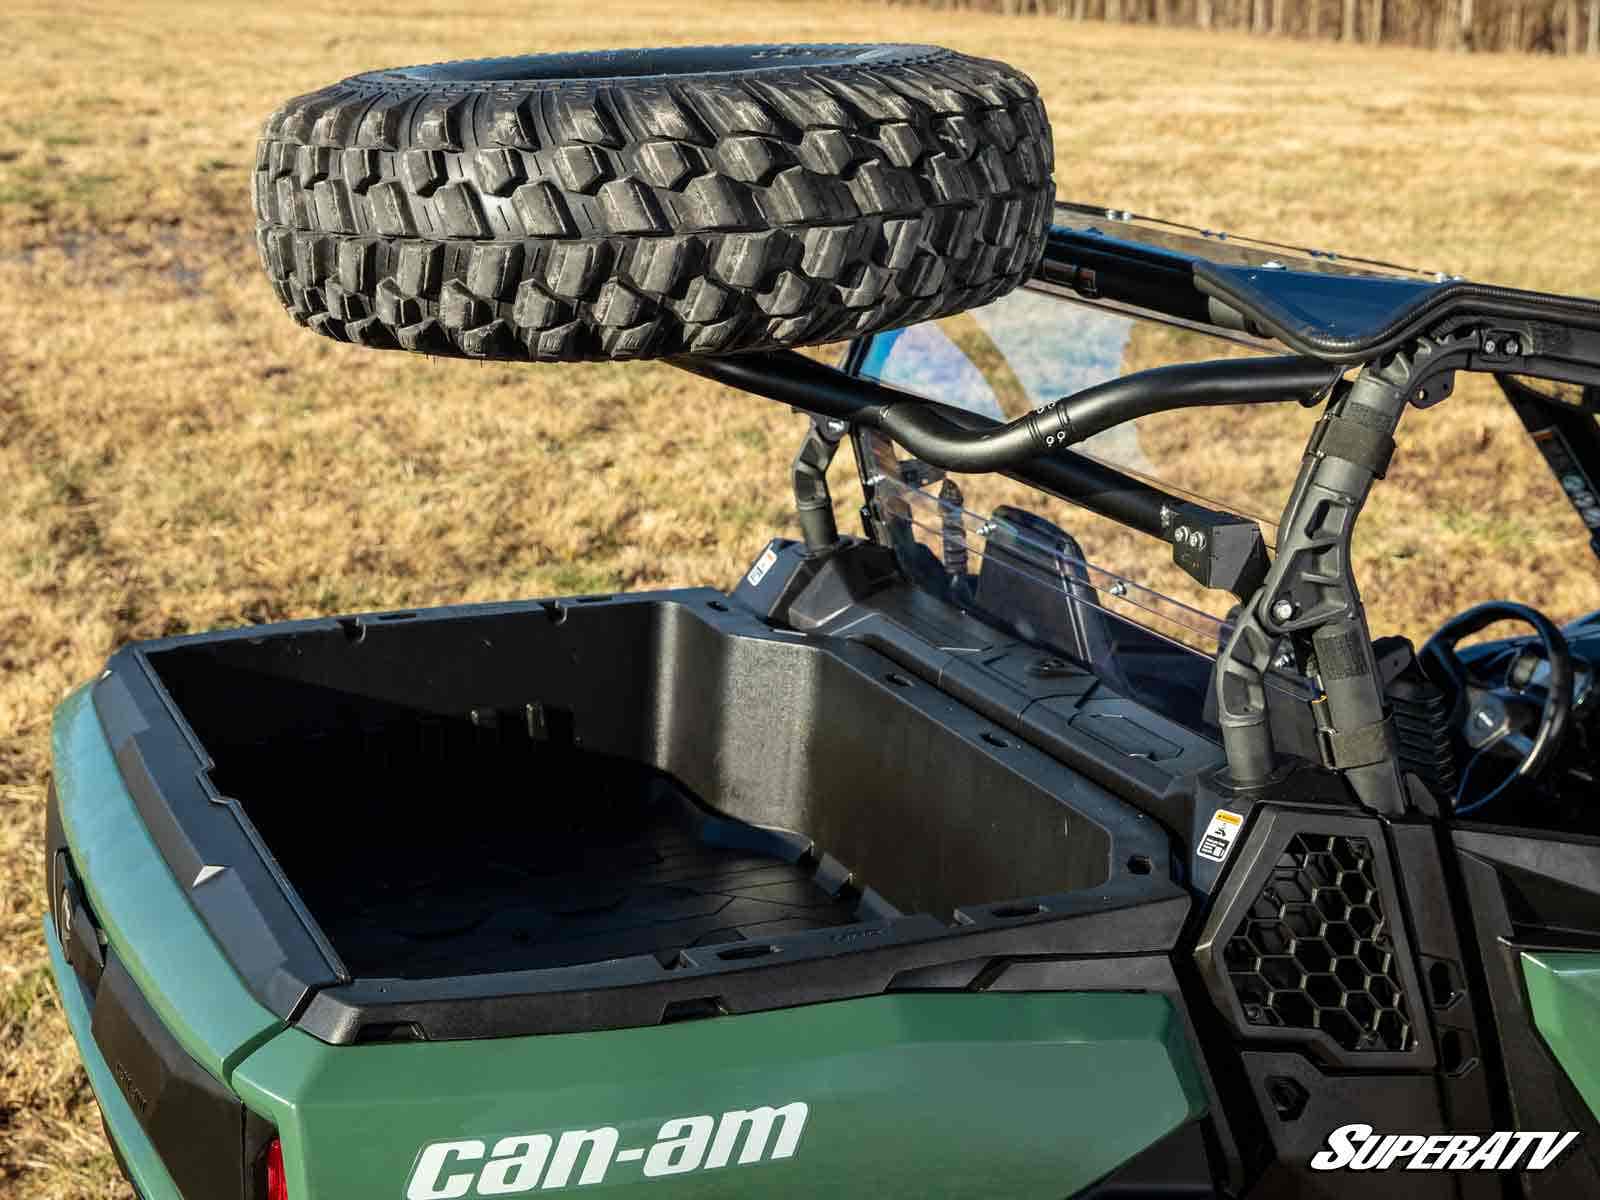 Can-Am Commander Spare Tire Carrier